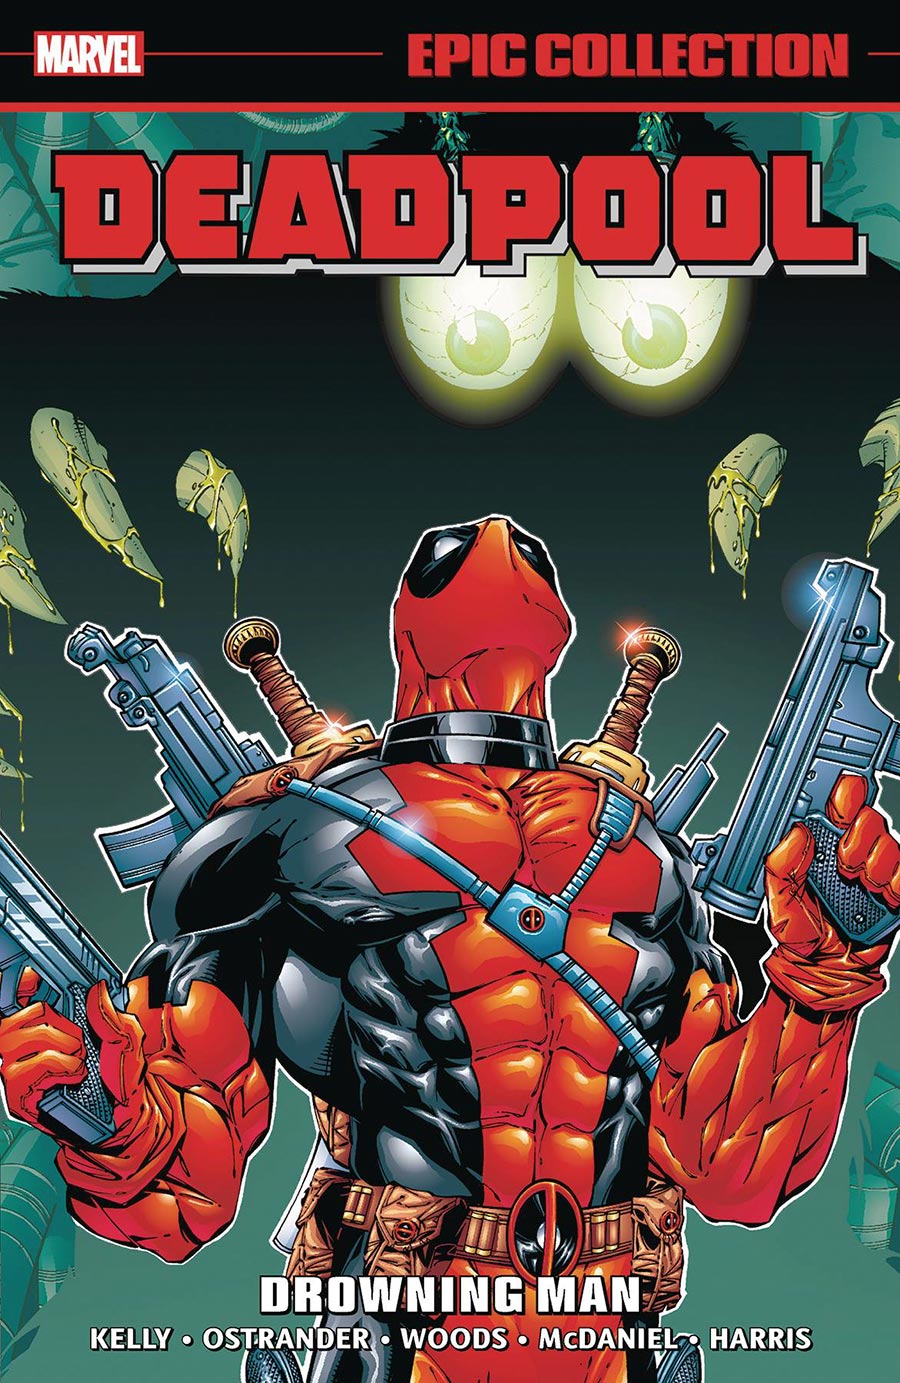 Deadpool Epic Collection Vol 3 Drowning Man TP